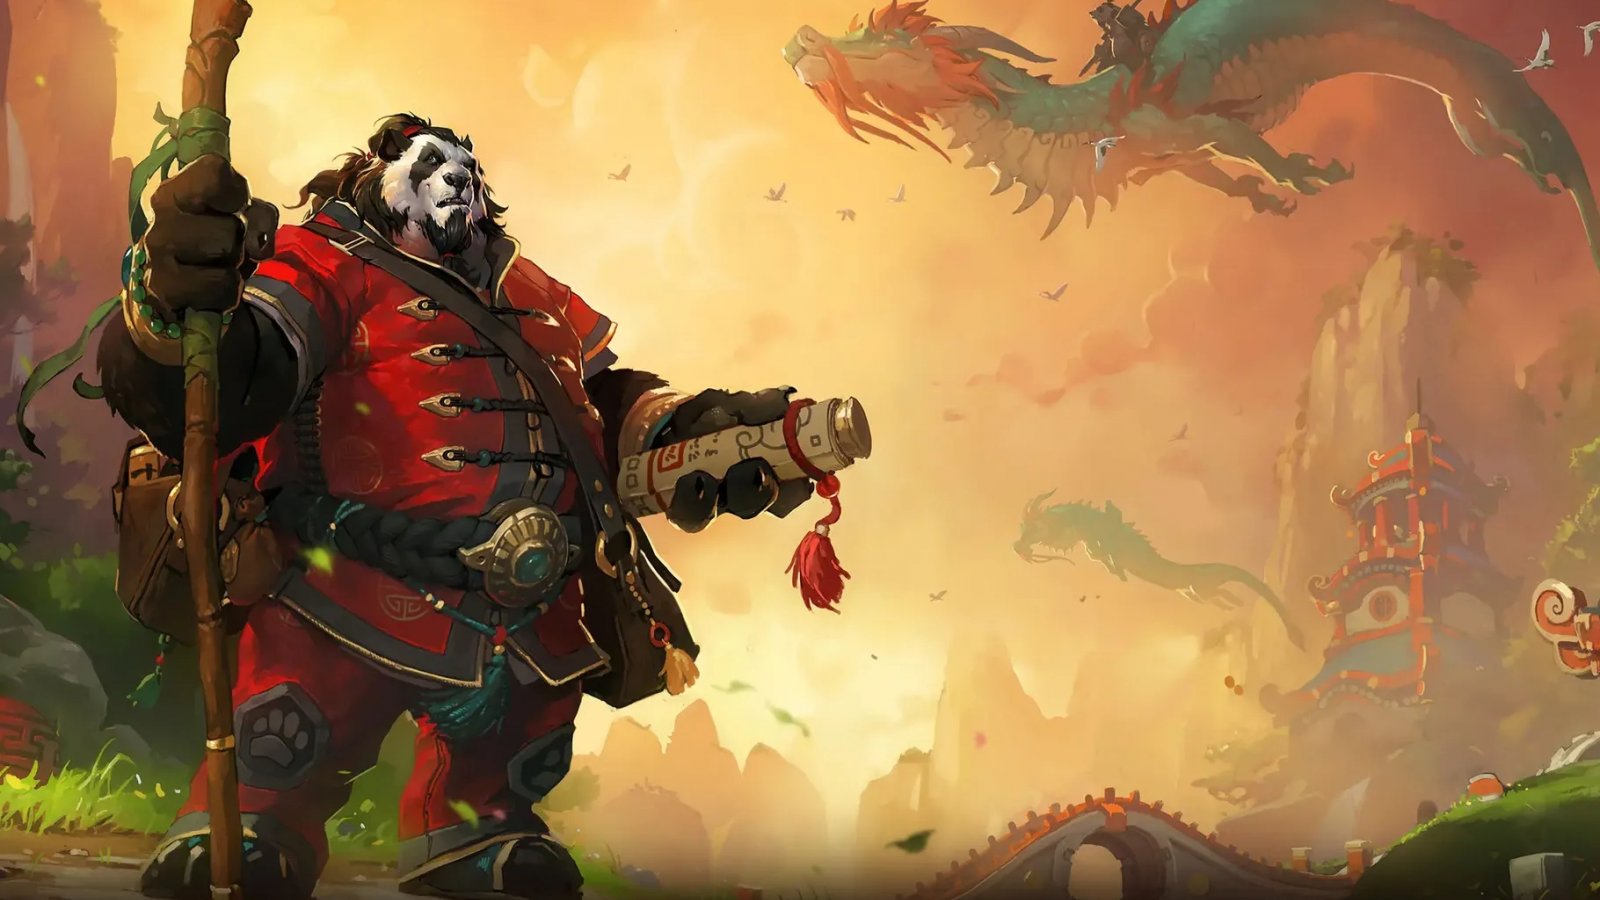 World of Warcraft: Blizzard annuncia Mists of Pandaria Remix, in arrivo